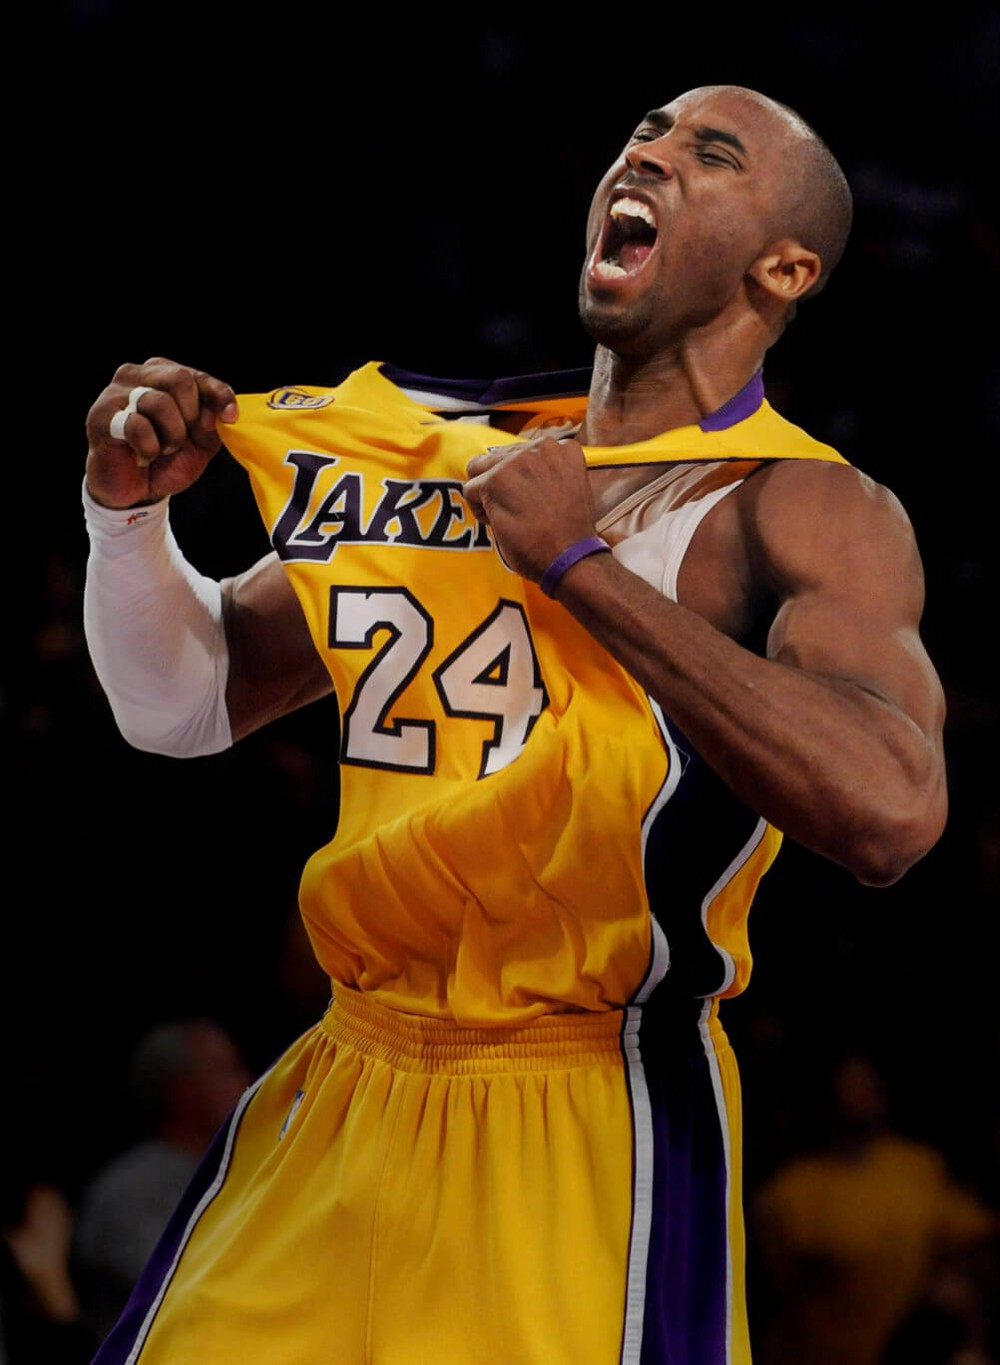 Why Kobe Bryant changed his Lakers jersey number 8 to 24